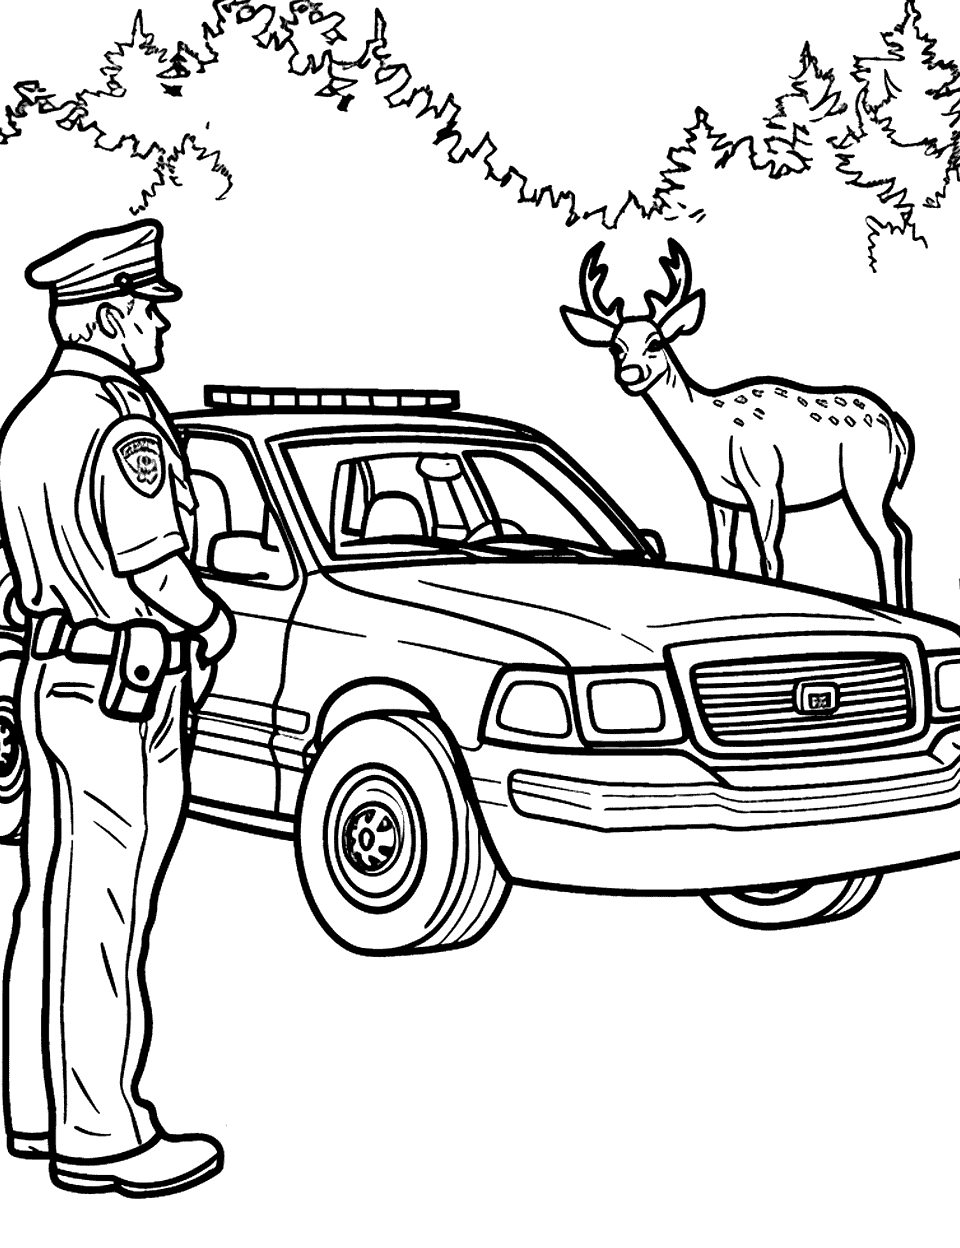 Wildlife Officer at Work Police Car Coloring Page - A police officer in a rural area near a deer, with his vehicle in the middle.